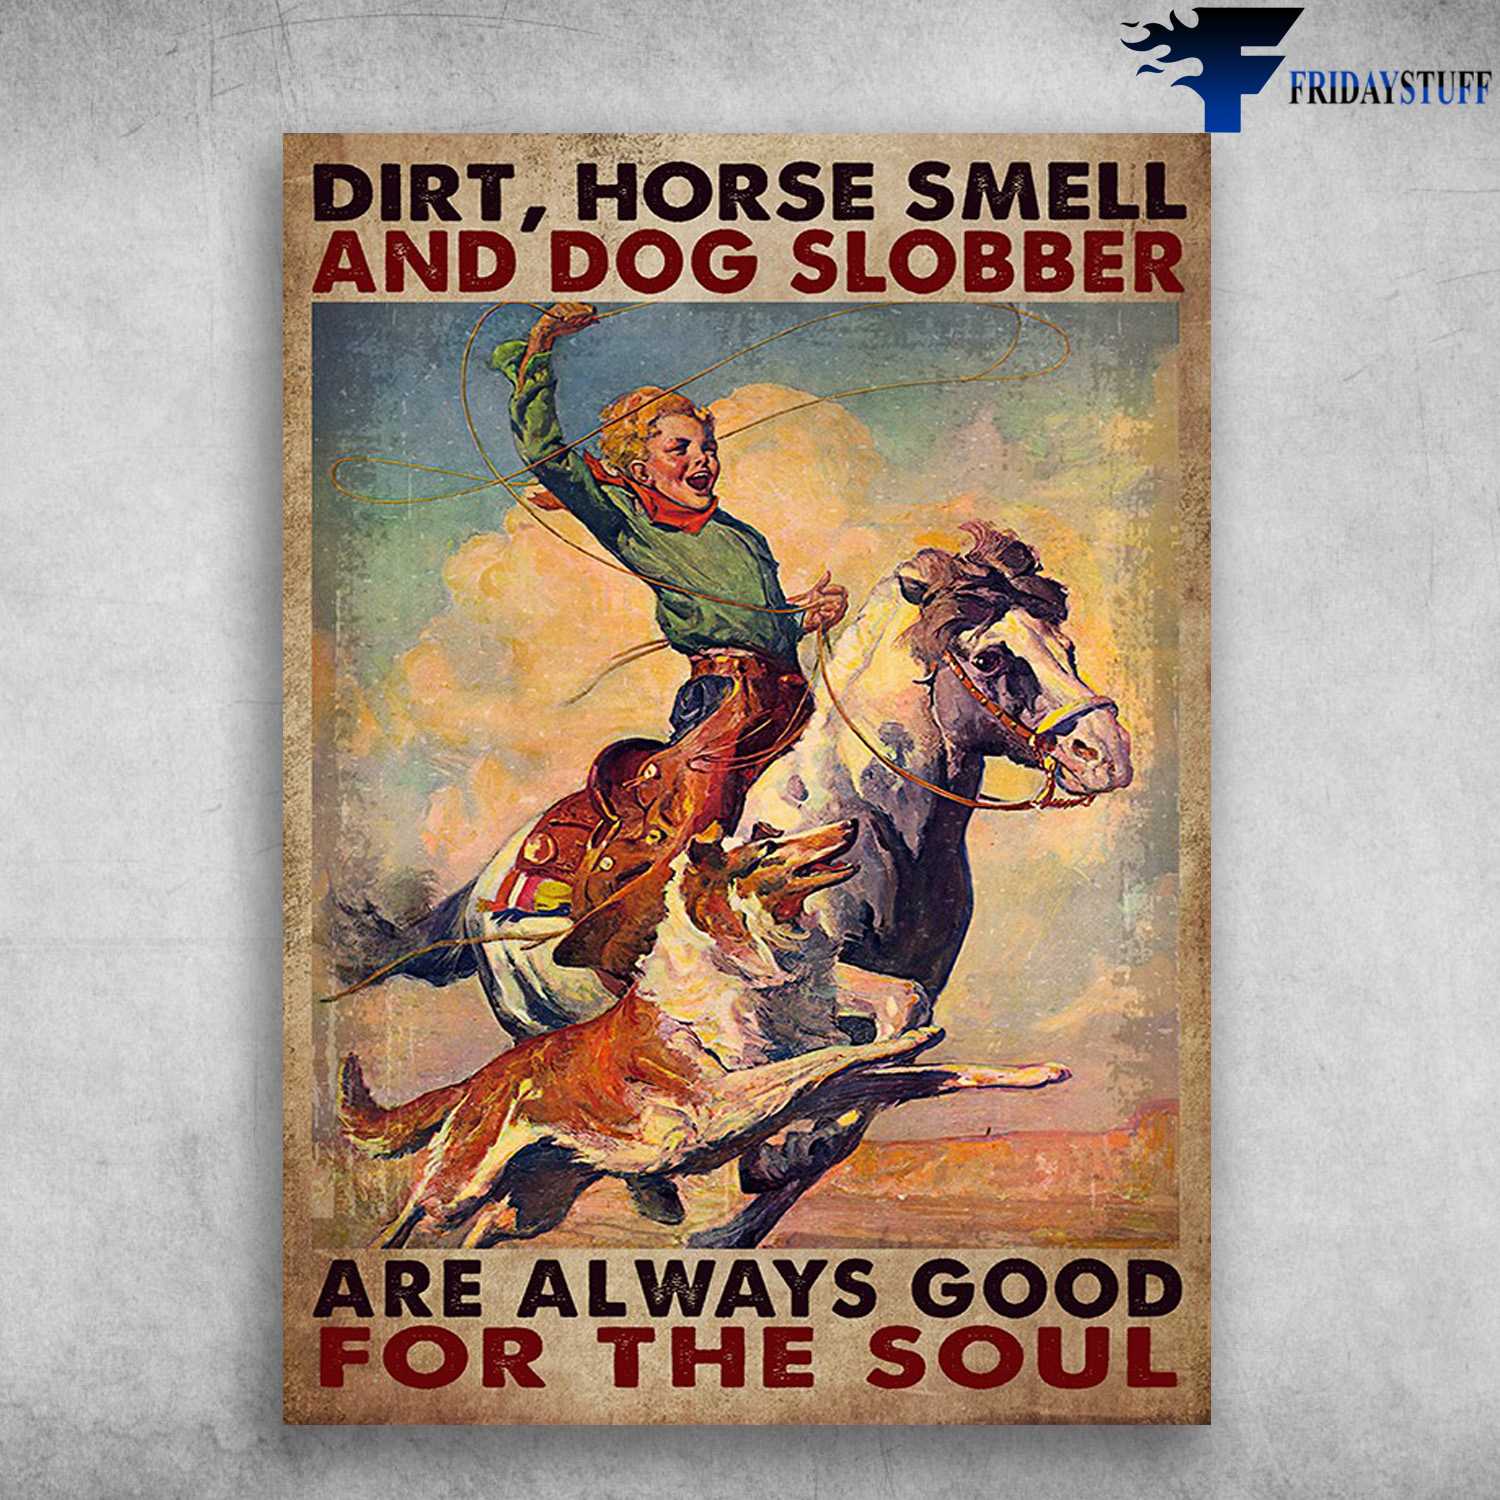 Cowboy And Dog, Horse Racing - Dirt, Horse Smell, And Dog Slobber, Are Always Good, For The Soul